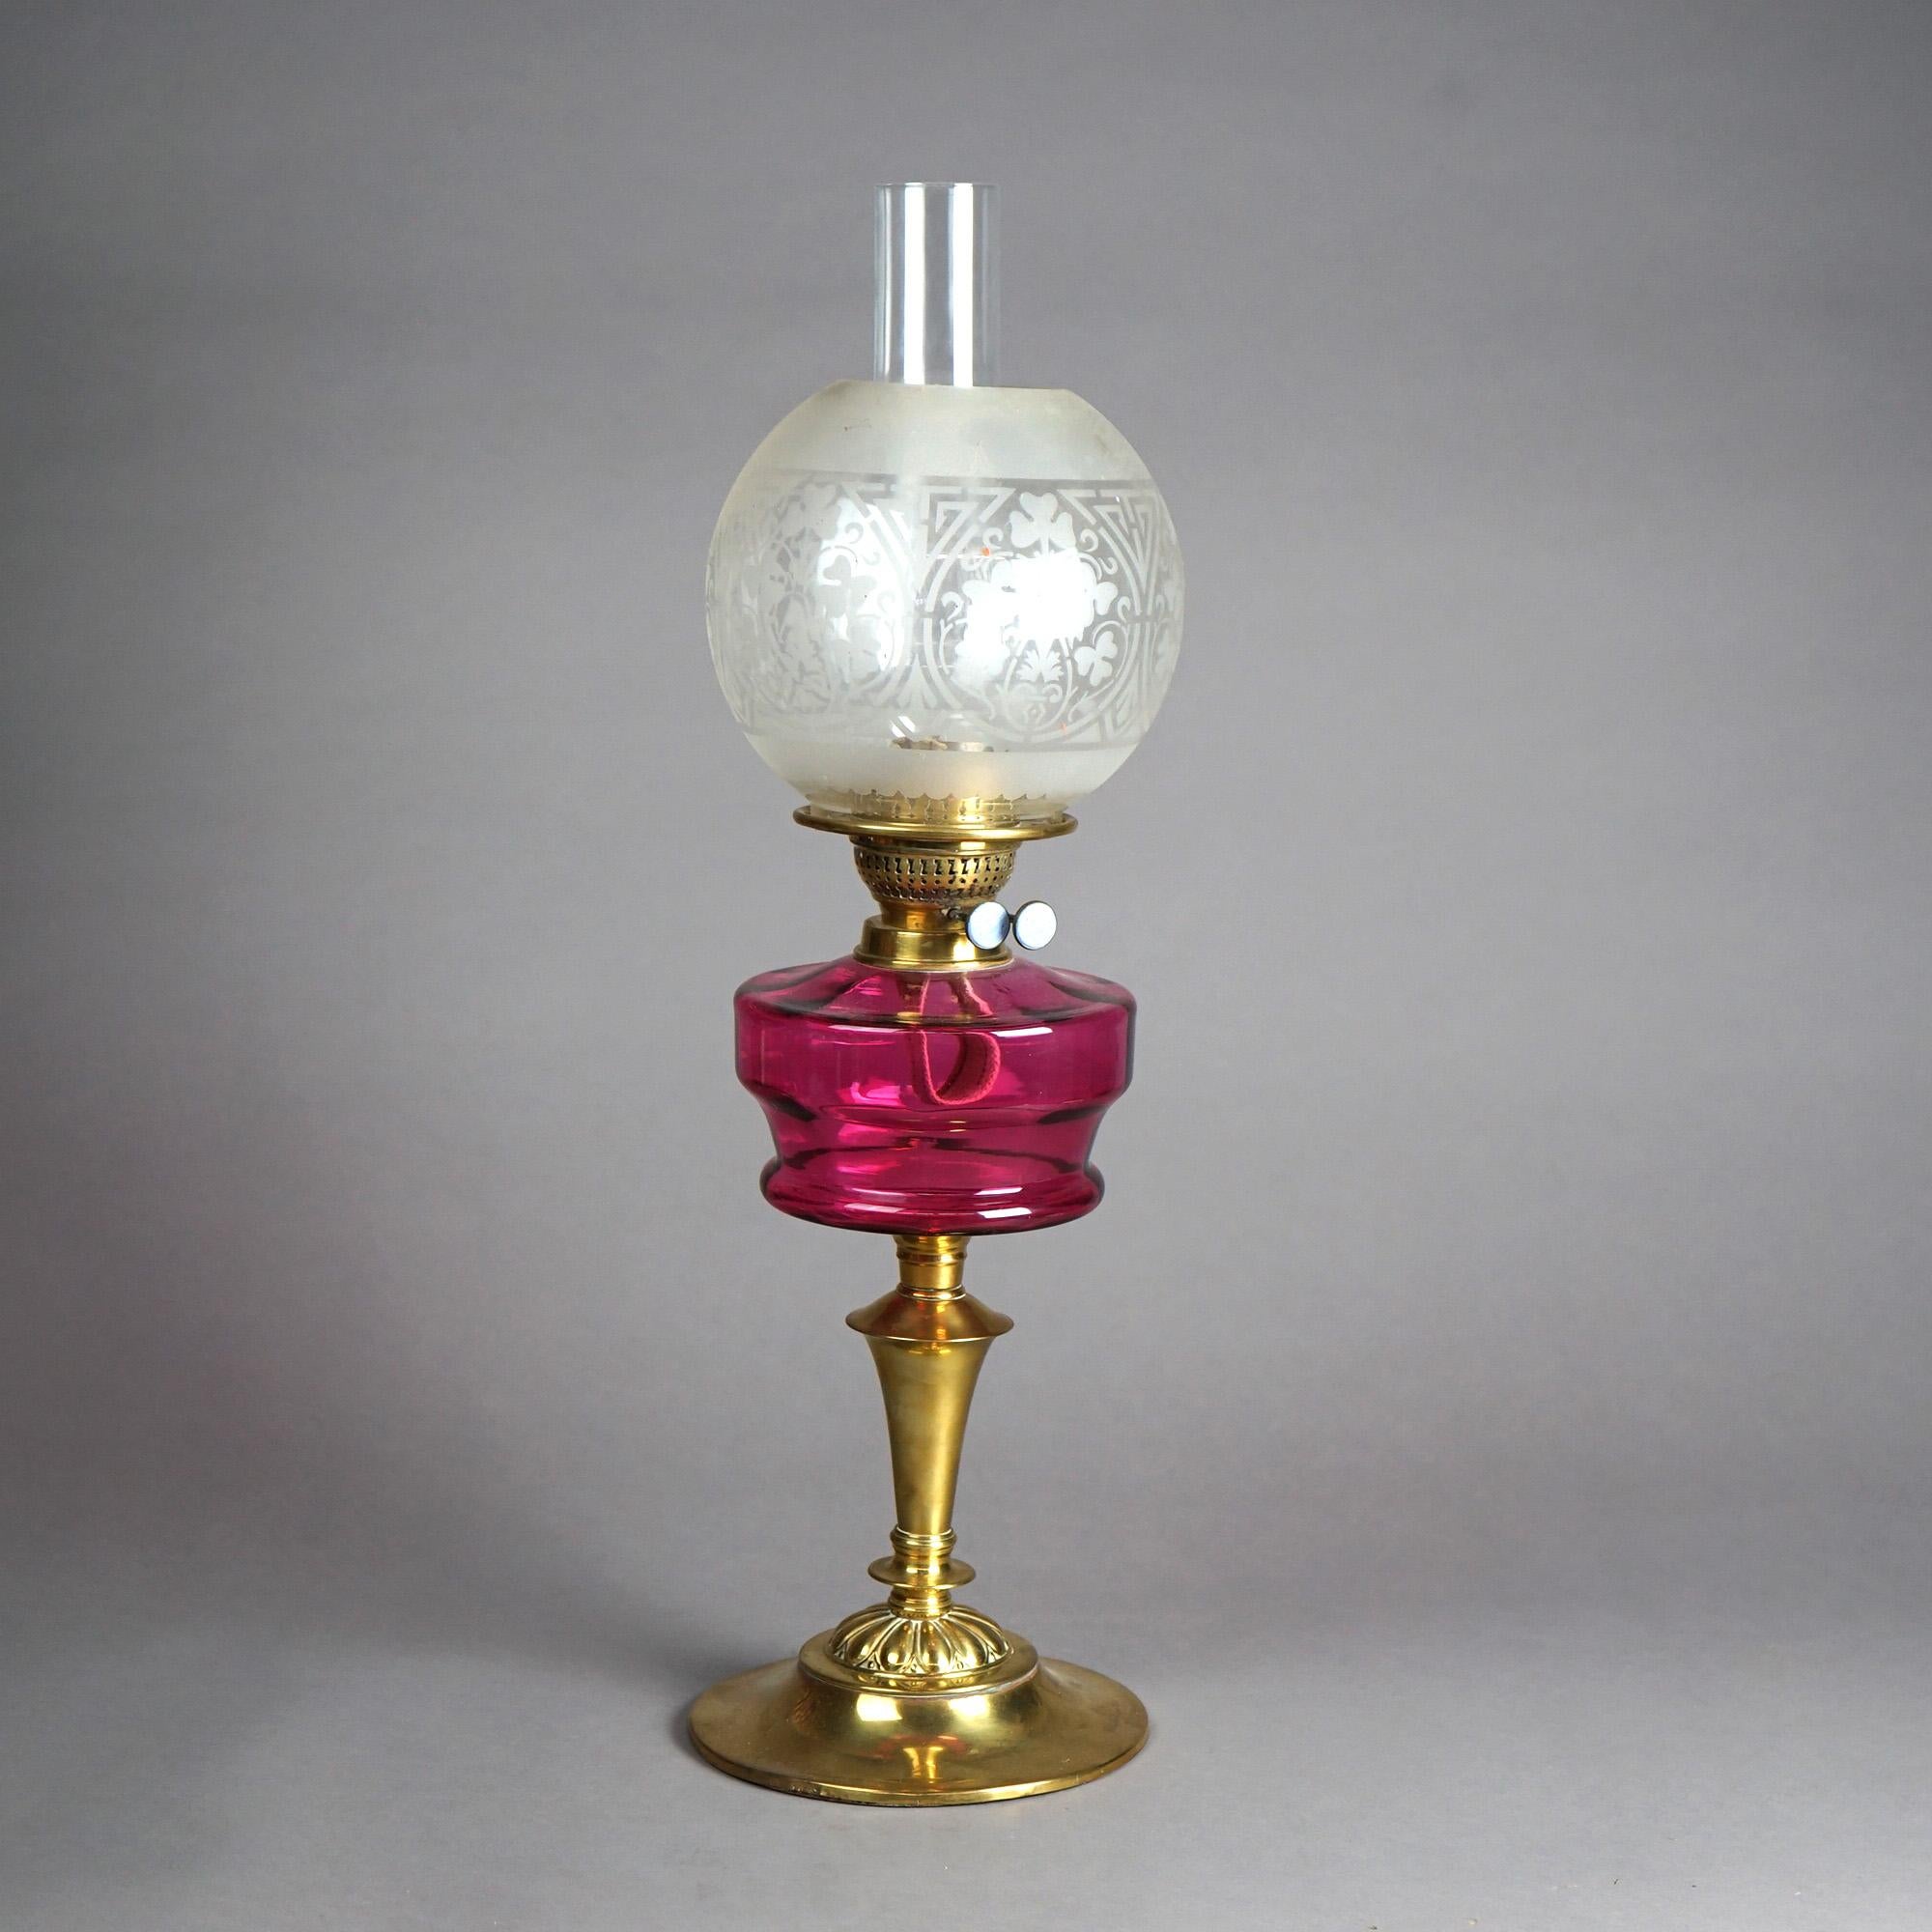 American Antique Brass &Cranberry Glass “Gone With The Wind” Oil Lamp C1890 For Sale